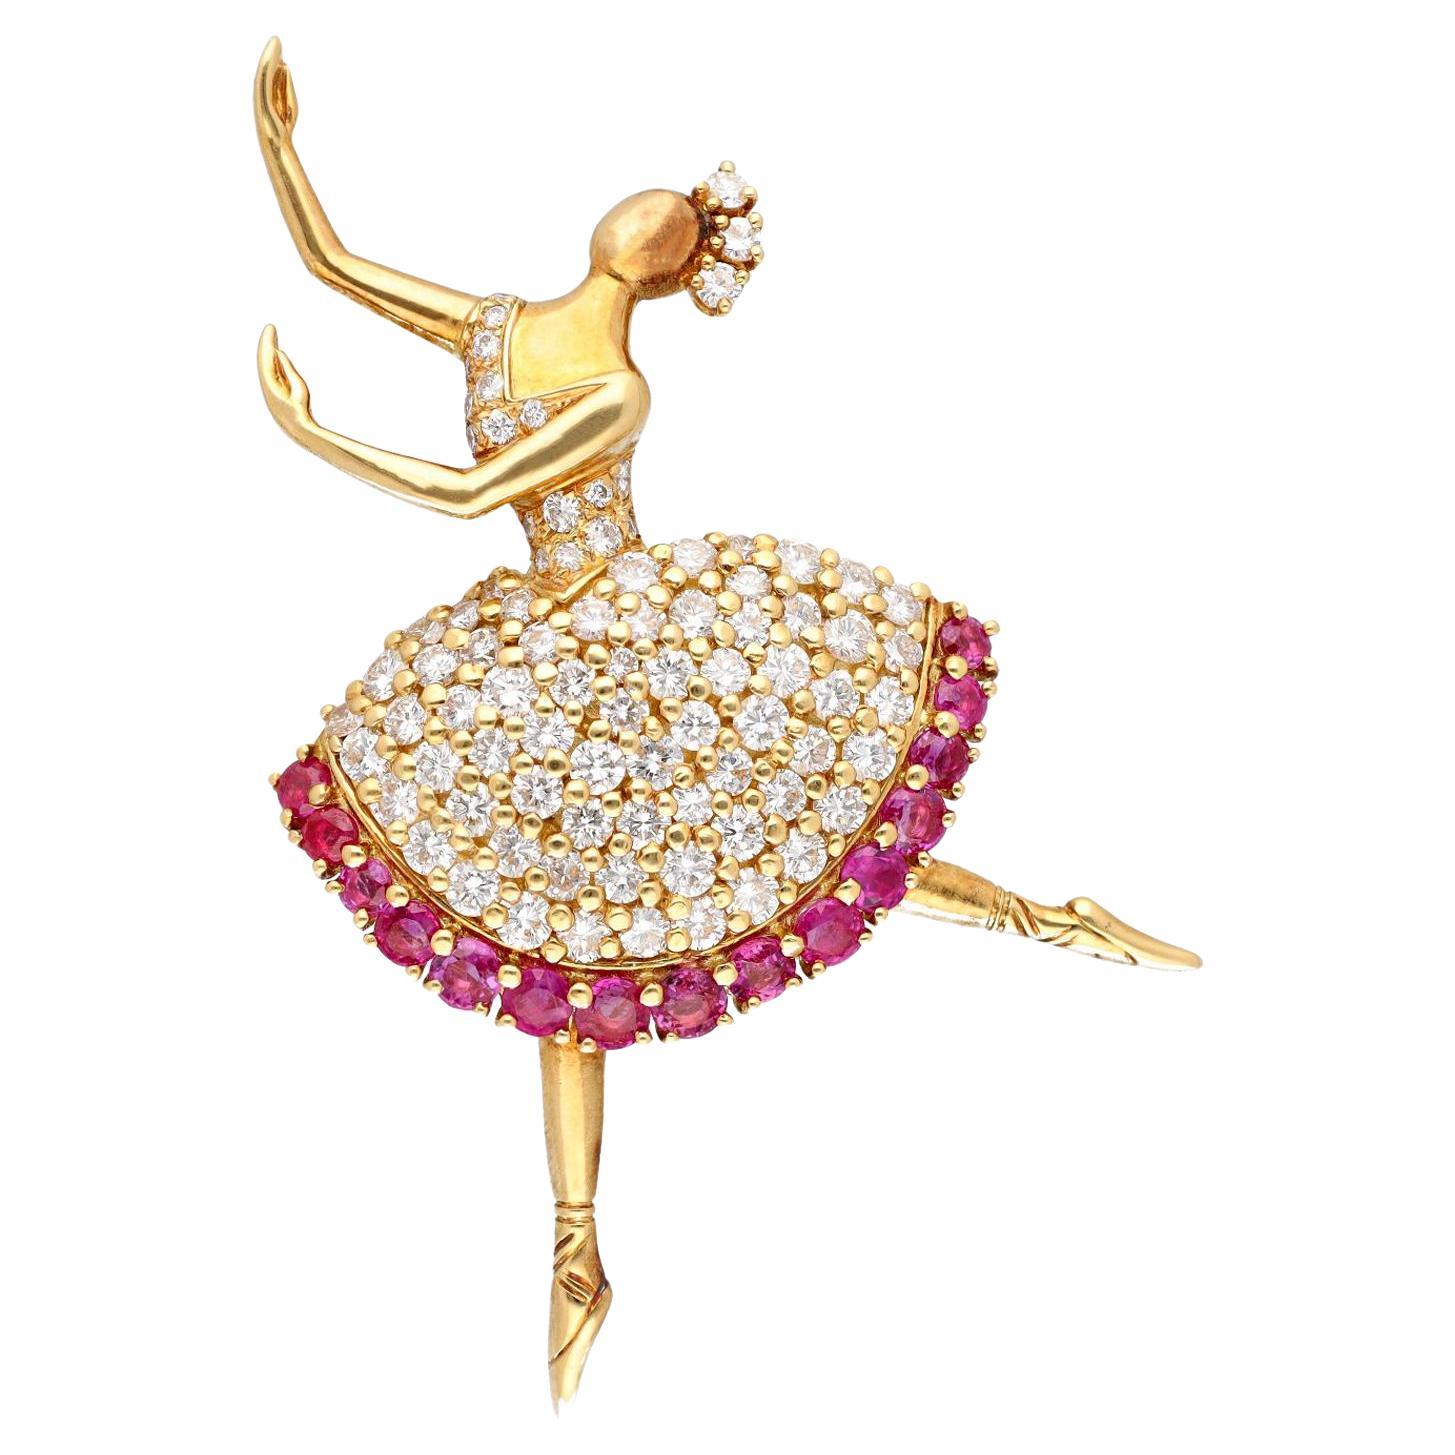 Van Cleef & Arpels 18K Yellow Gold, Diamond and Ruby Ballerina Brooch For Sale